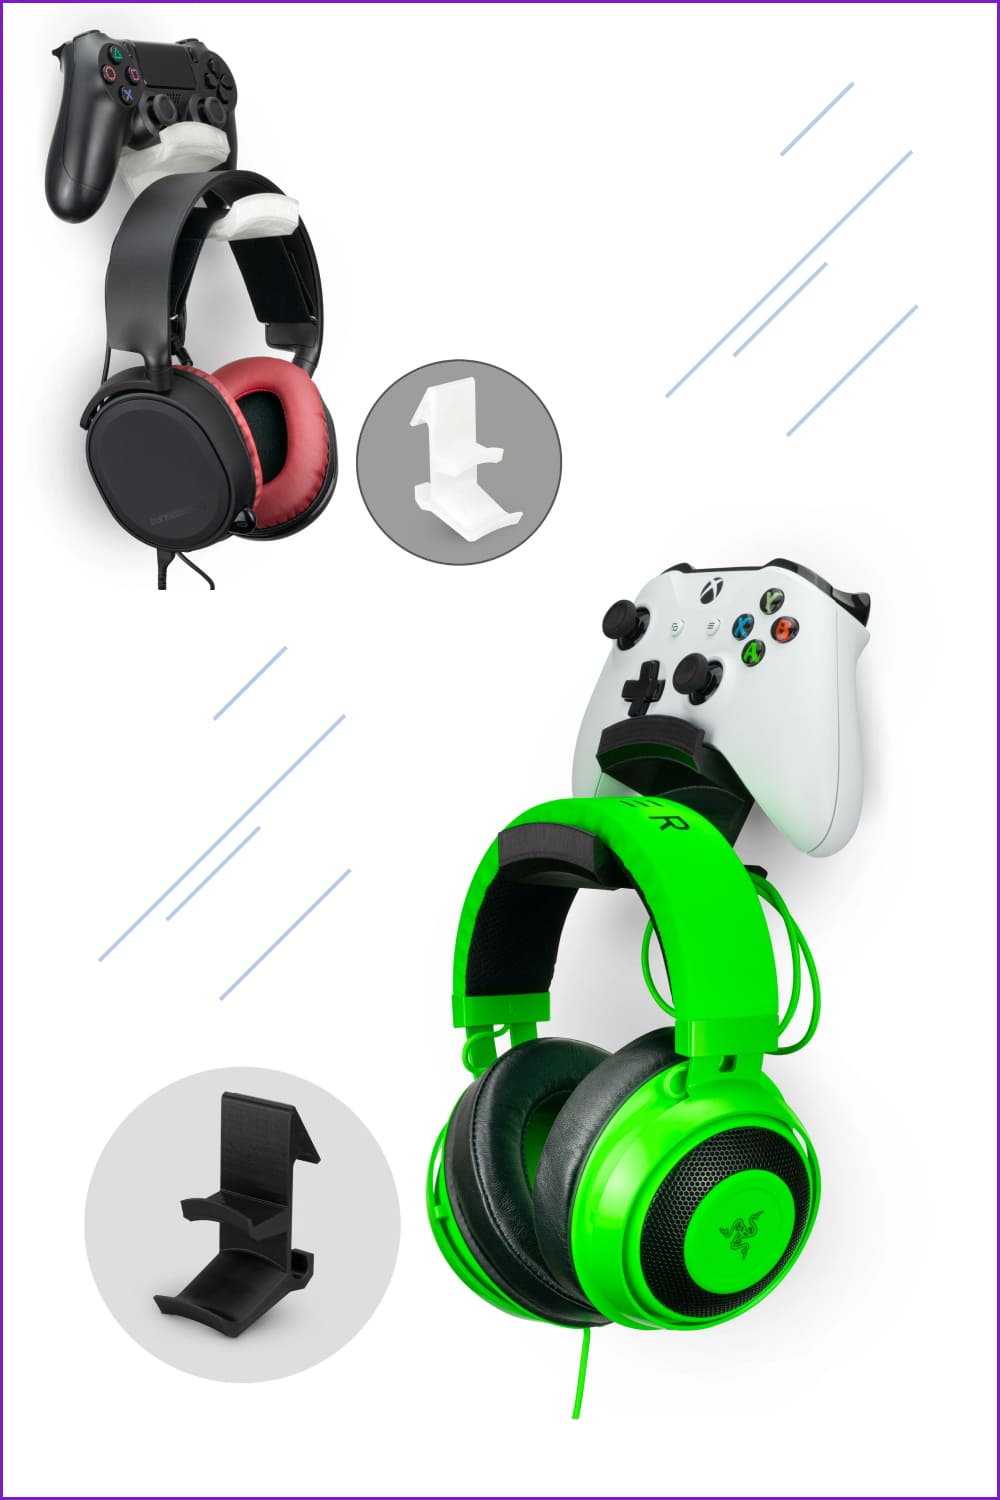 Green and black headphones on white background.